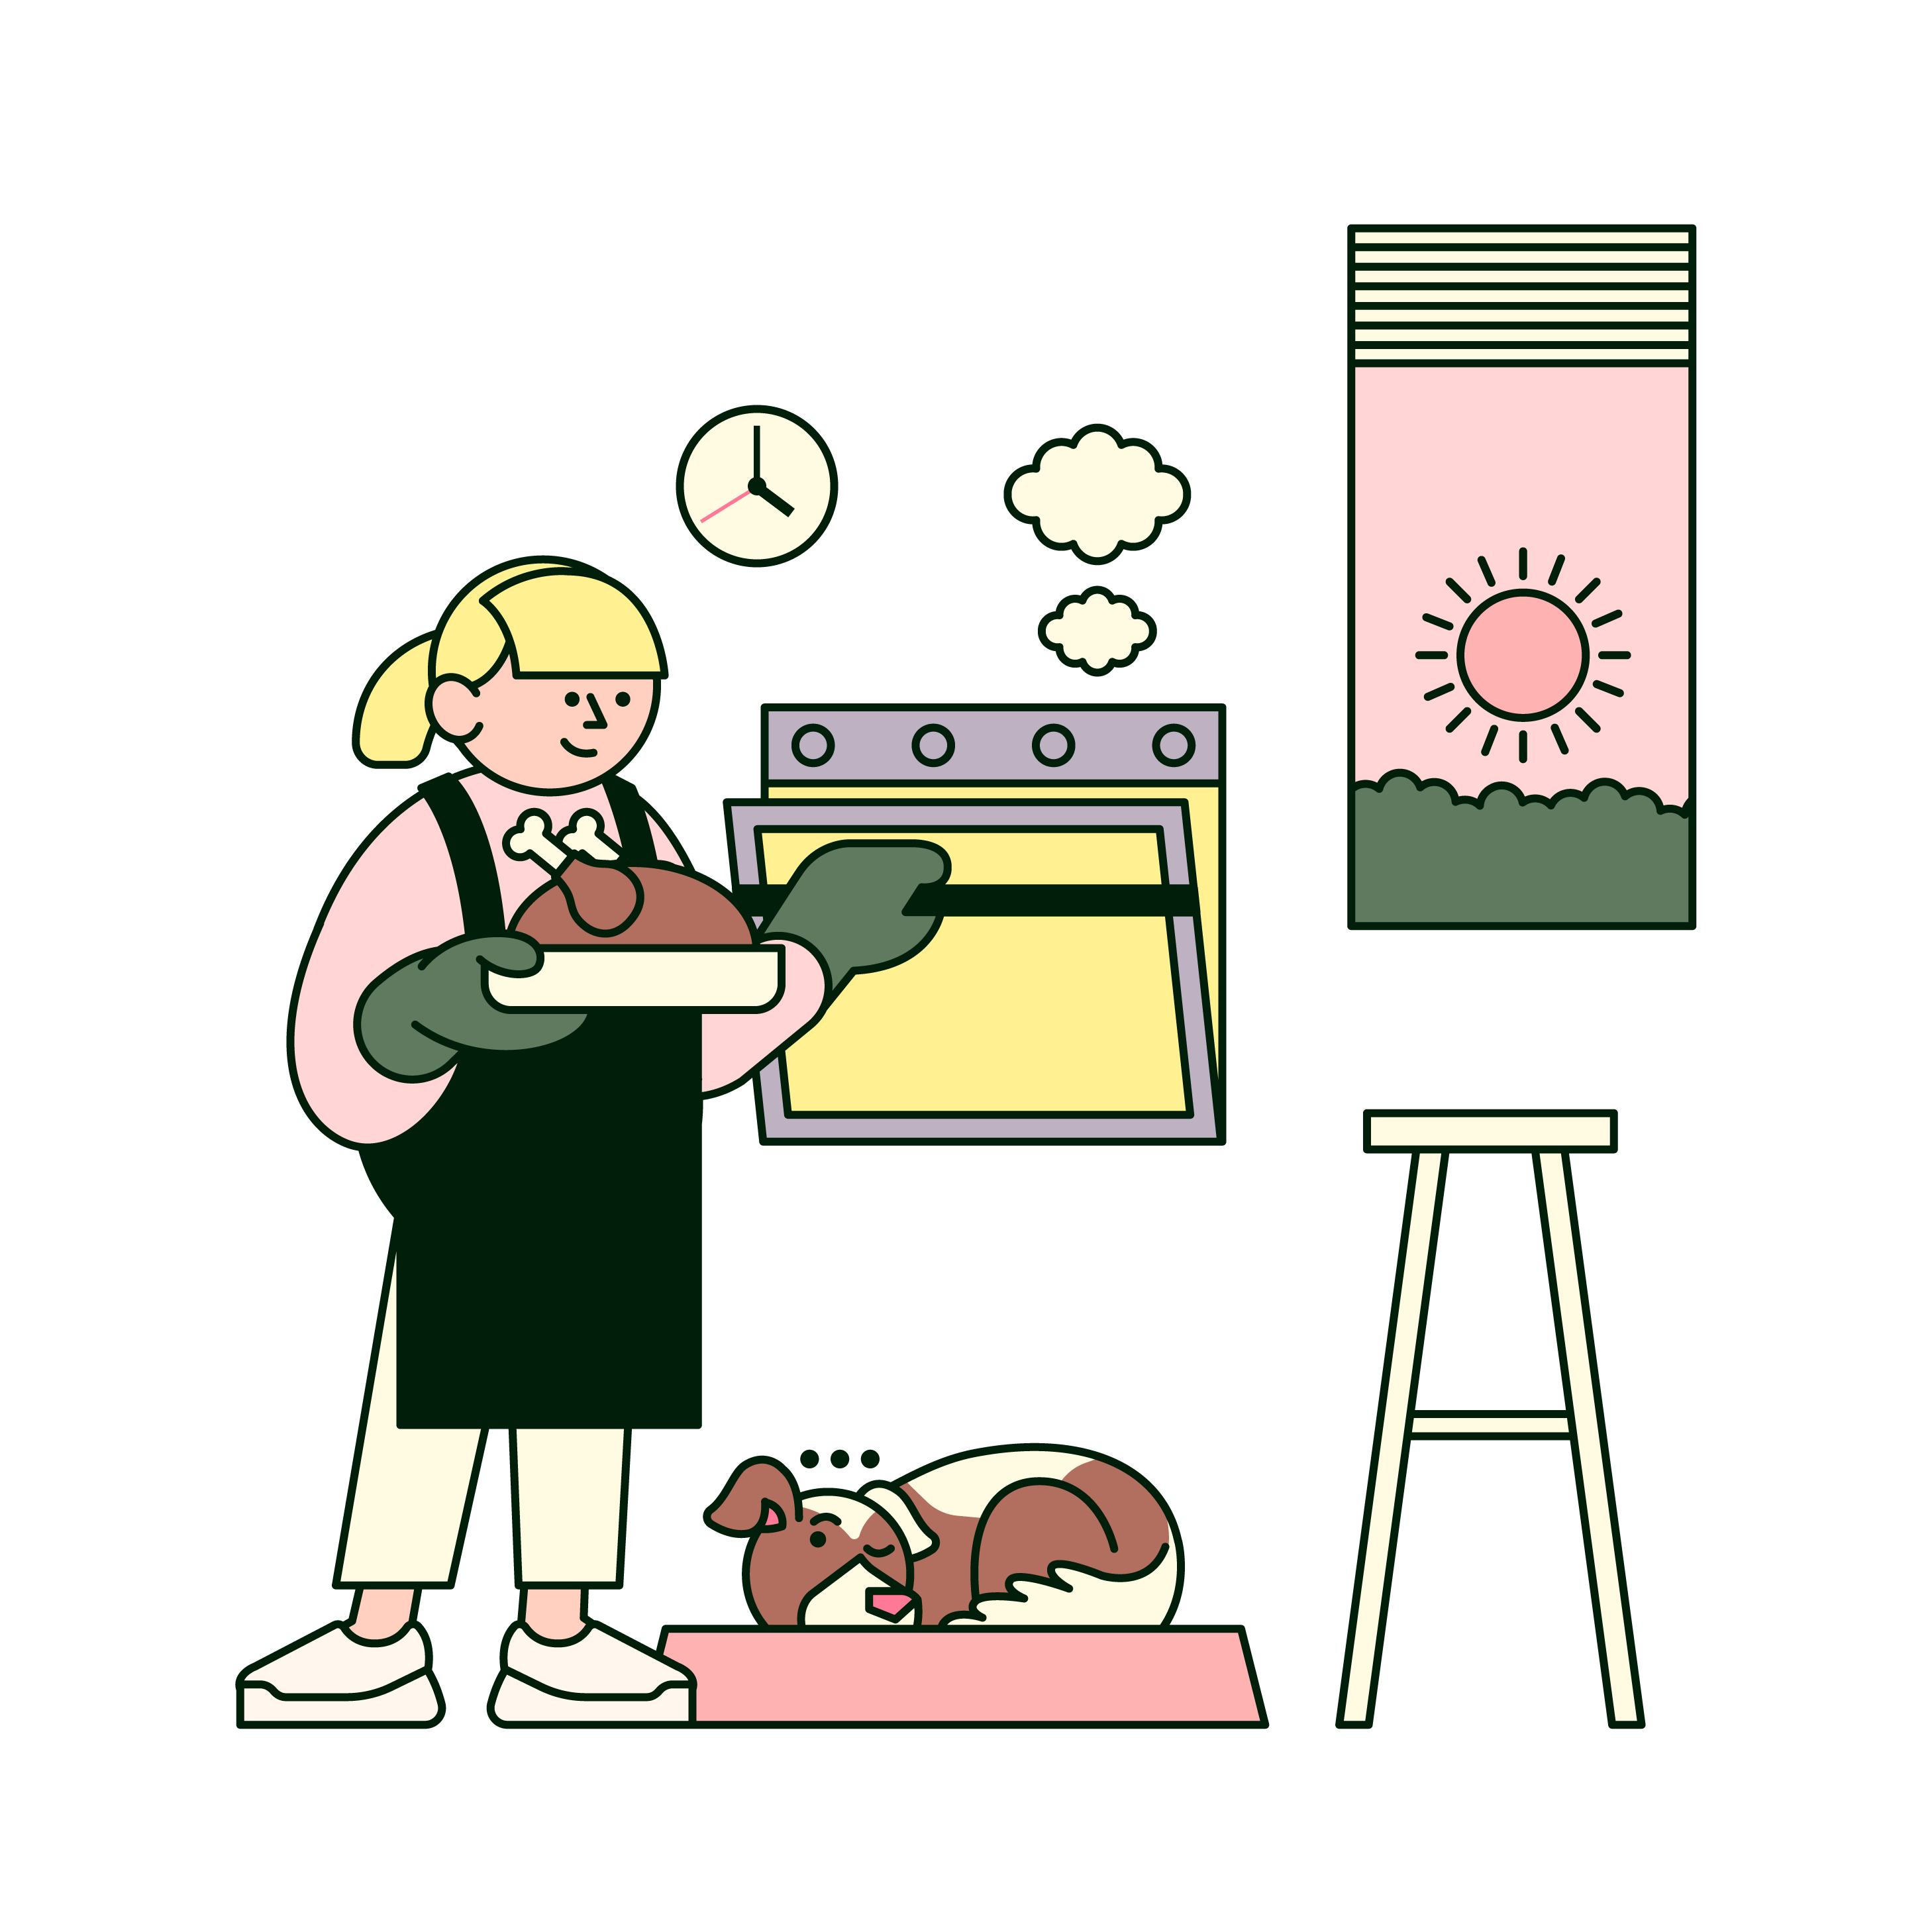 Cooking with dog in the kitchen